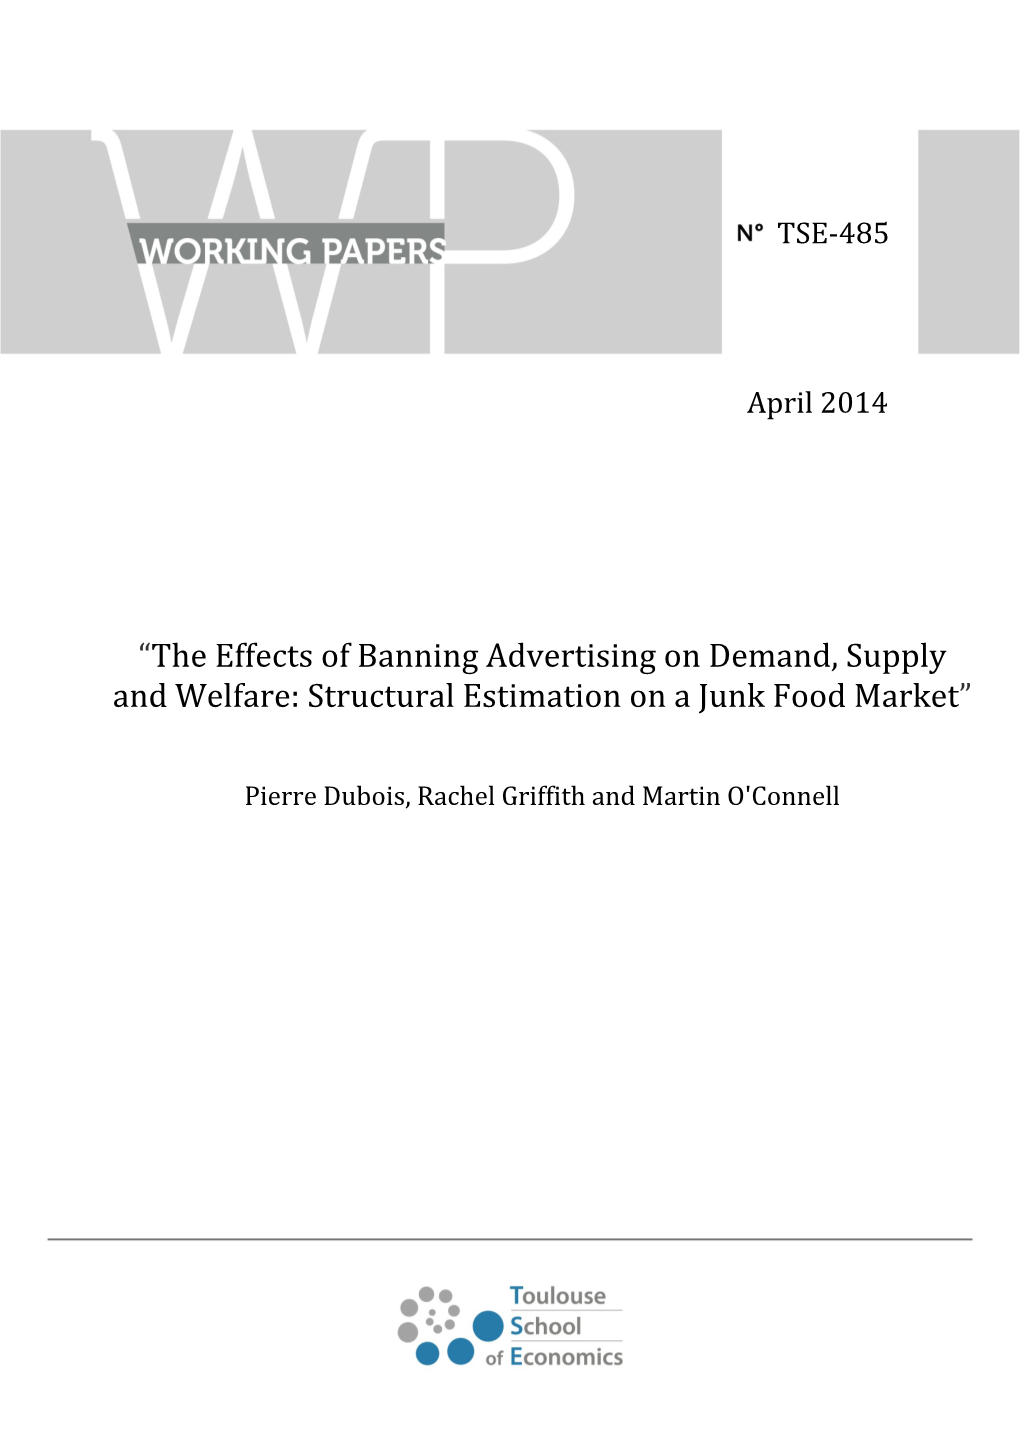 “The Effects of Banning Advertising on Demand, Supply and Welfare: Structural Estimation on a Junk Food Market”